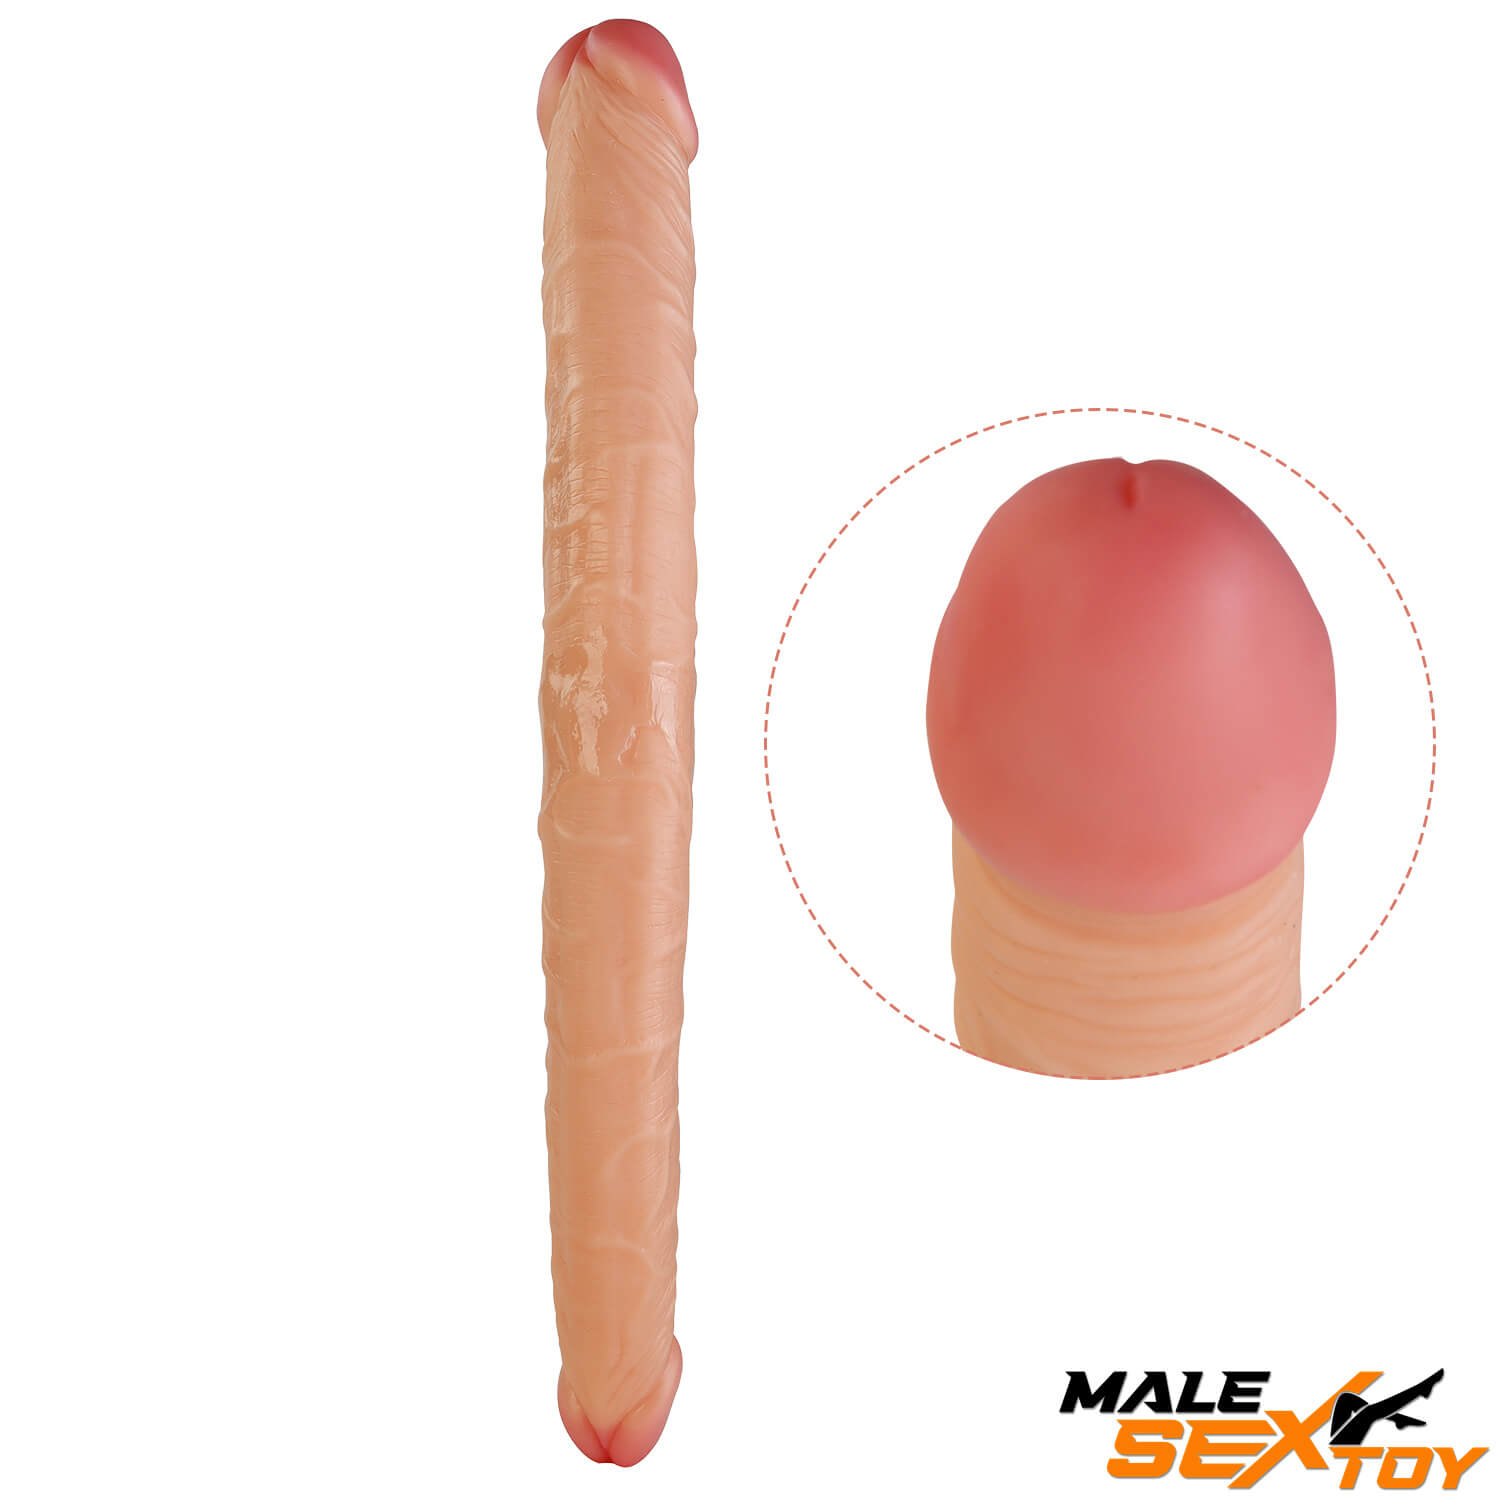 14.6in 10.6in Big Small Glans Dual Heads Dildo For Gay Men